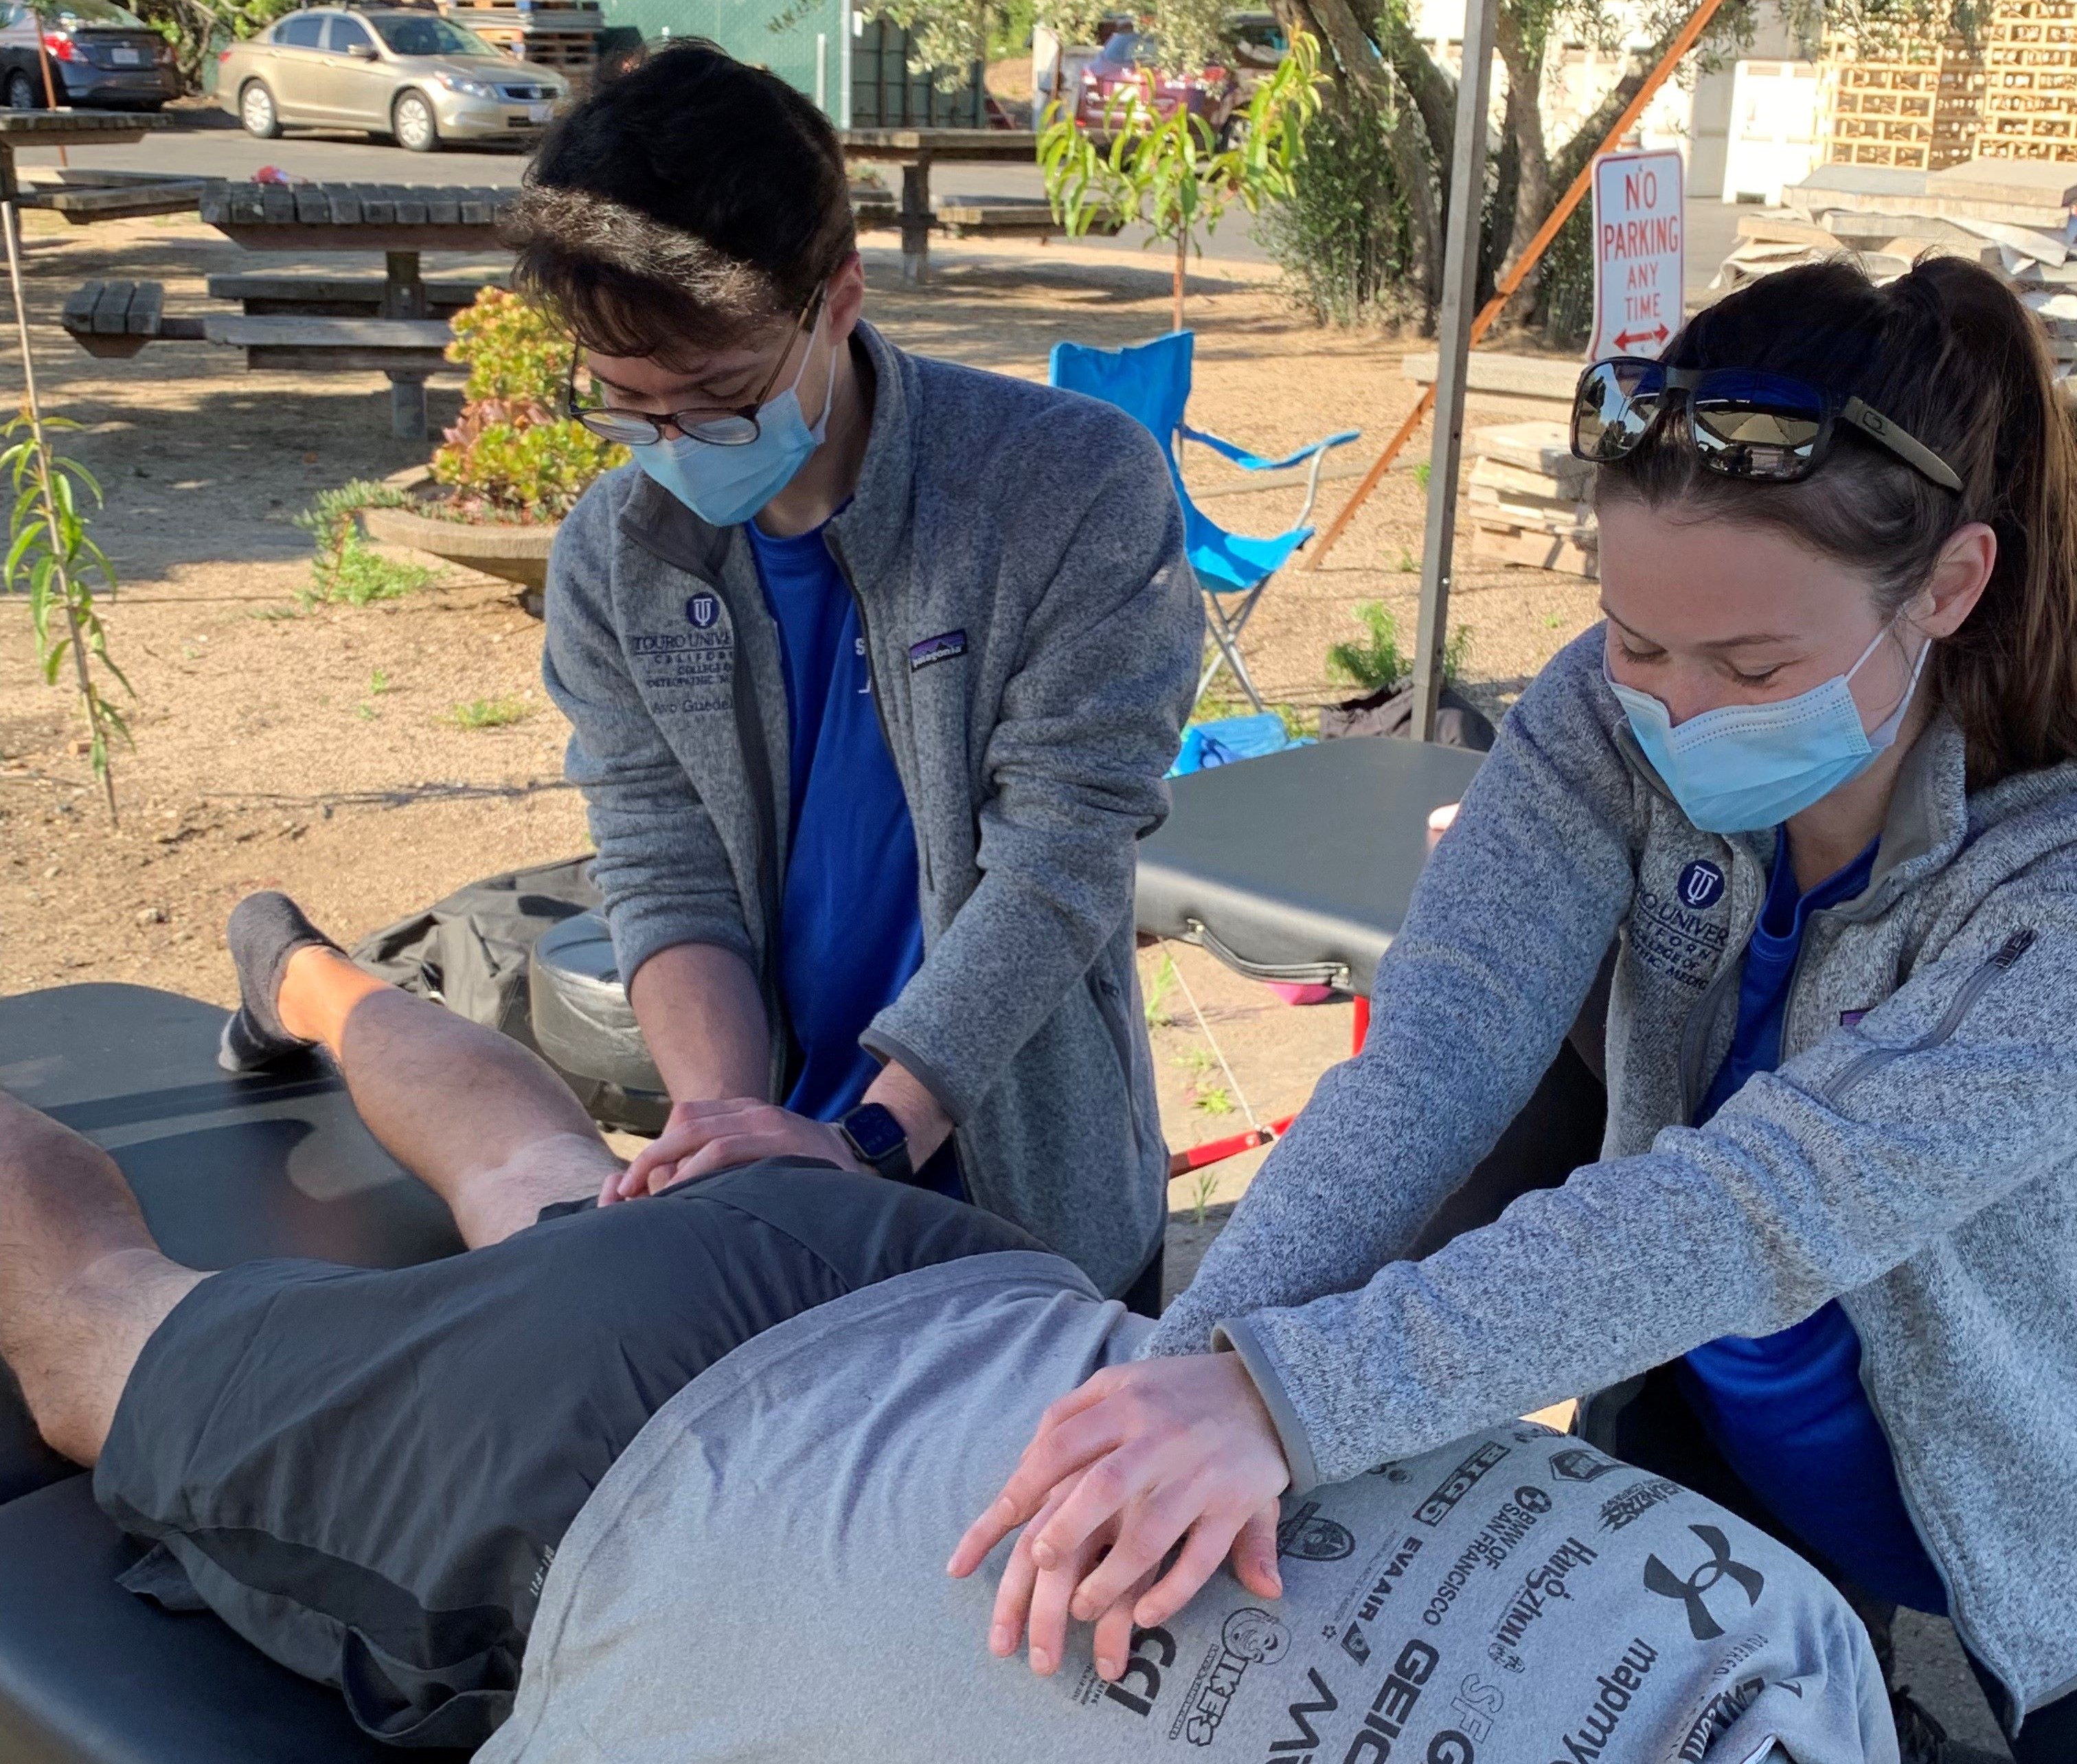 Student doctors demonstrate OMM treatments to an athlete on a treatment table at a running event